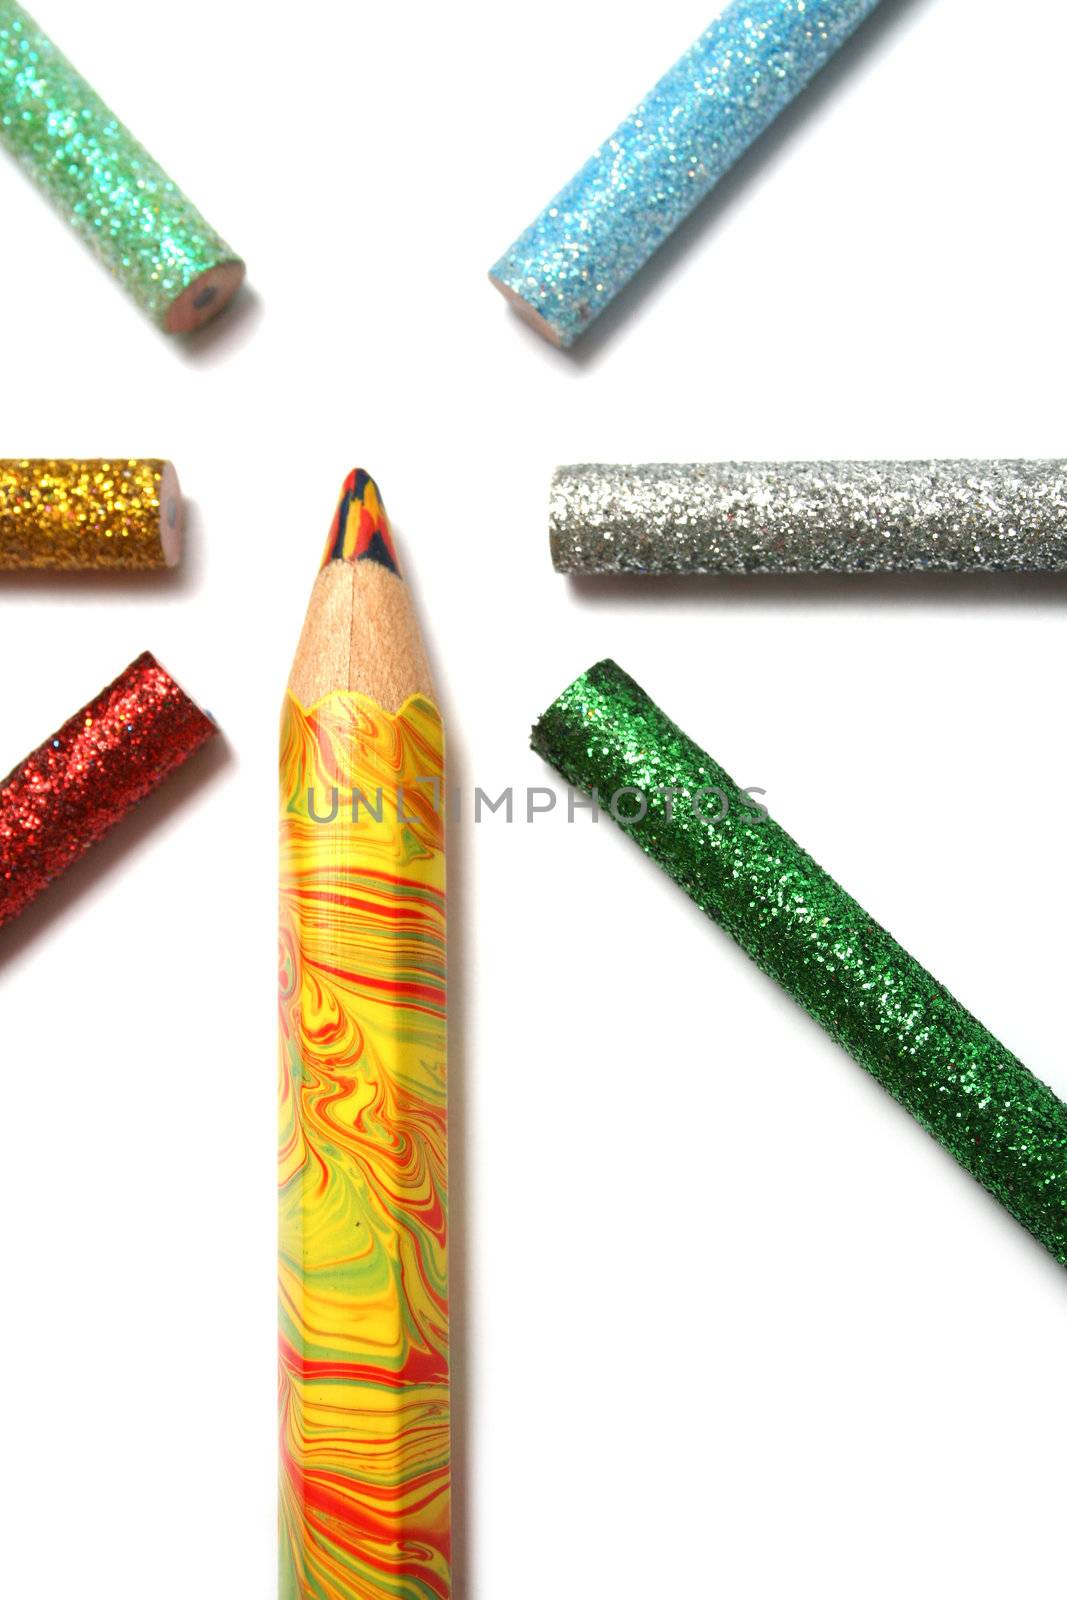 The multi-colour big pencil is surrounded by brilliant color pencils from above